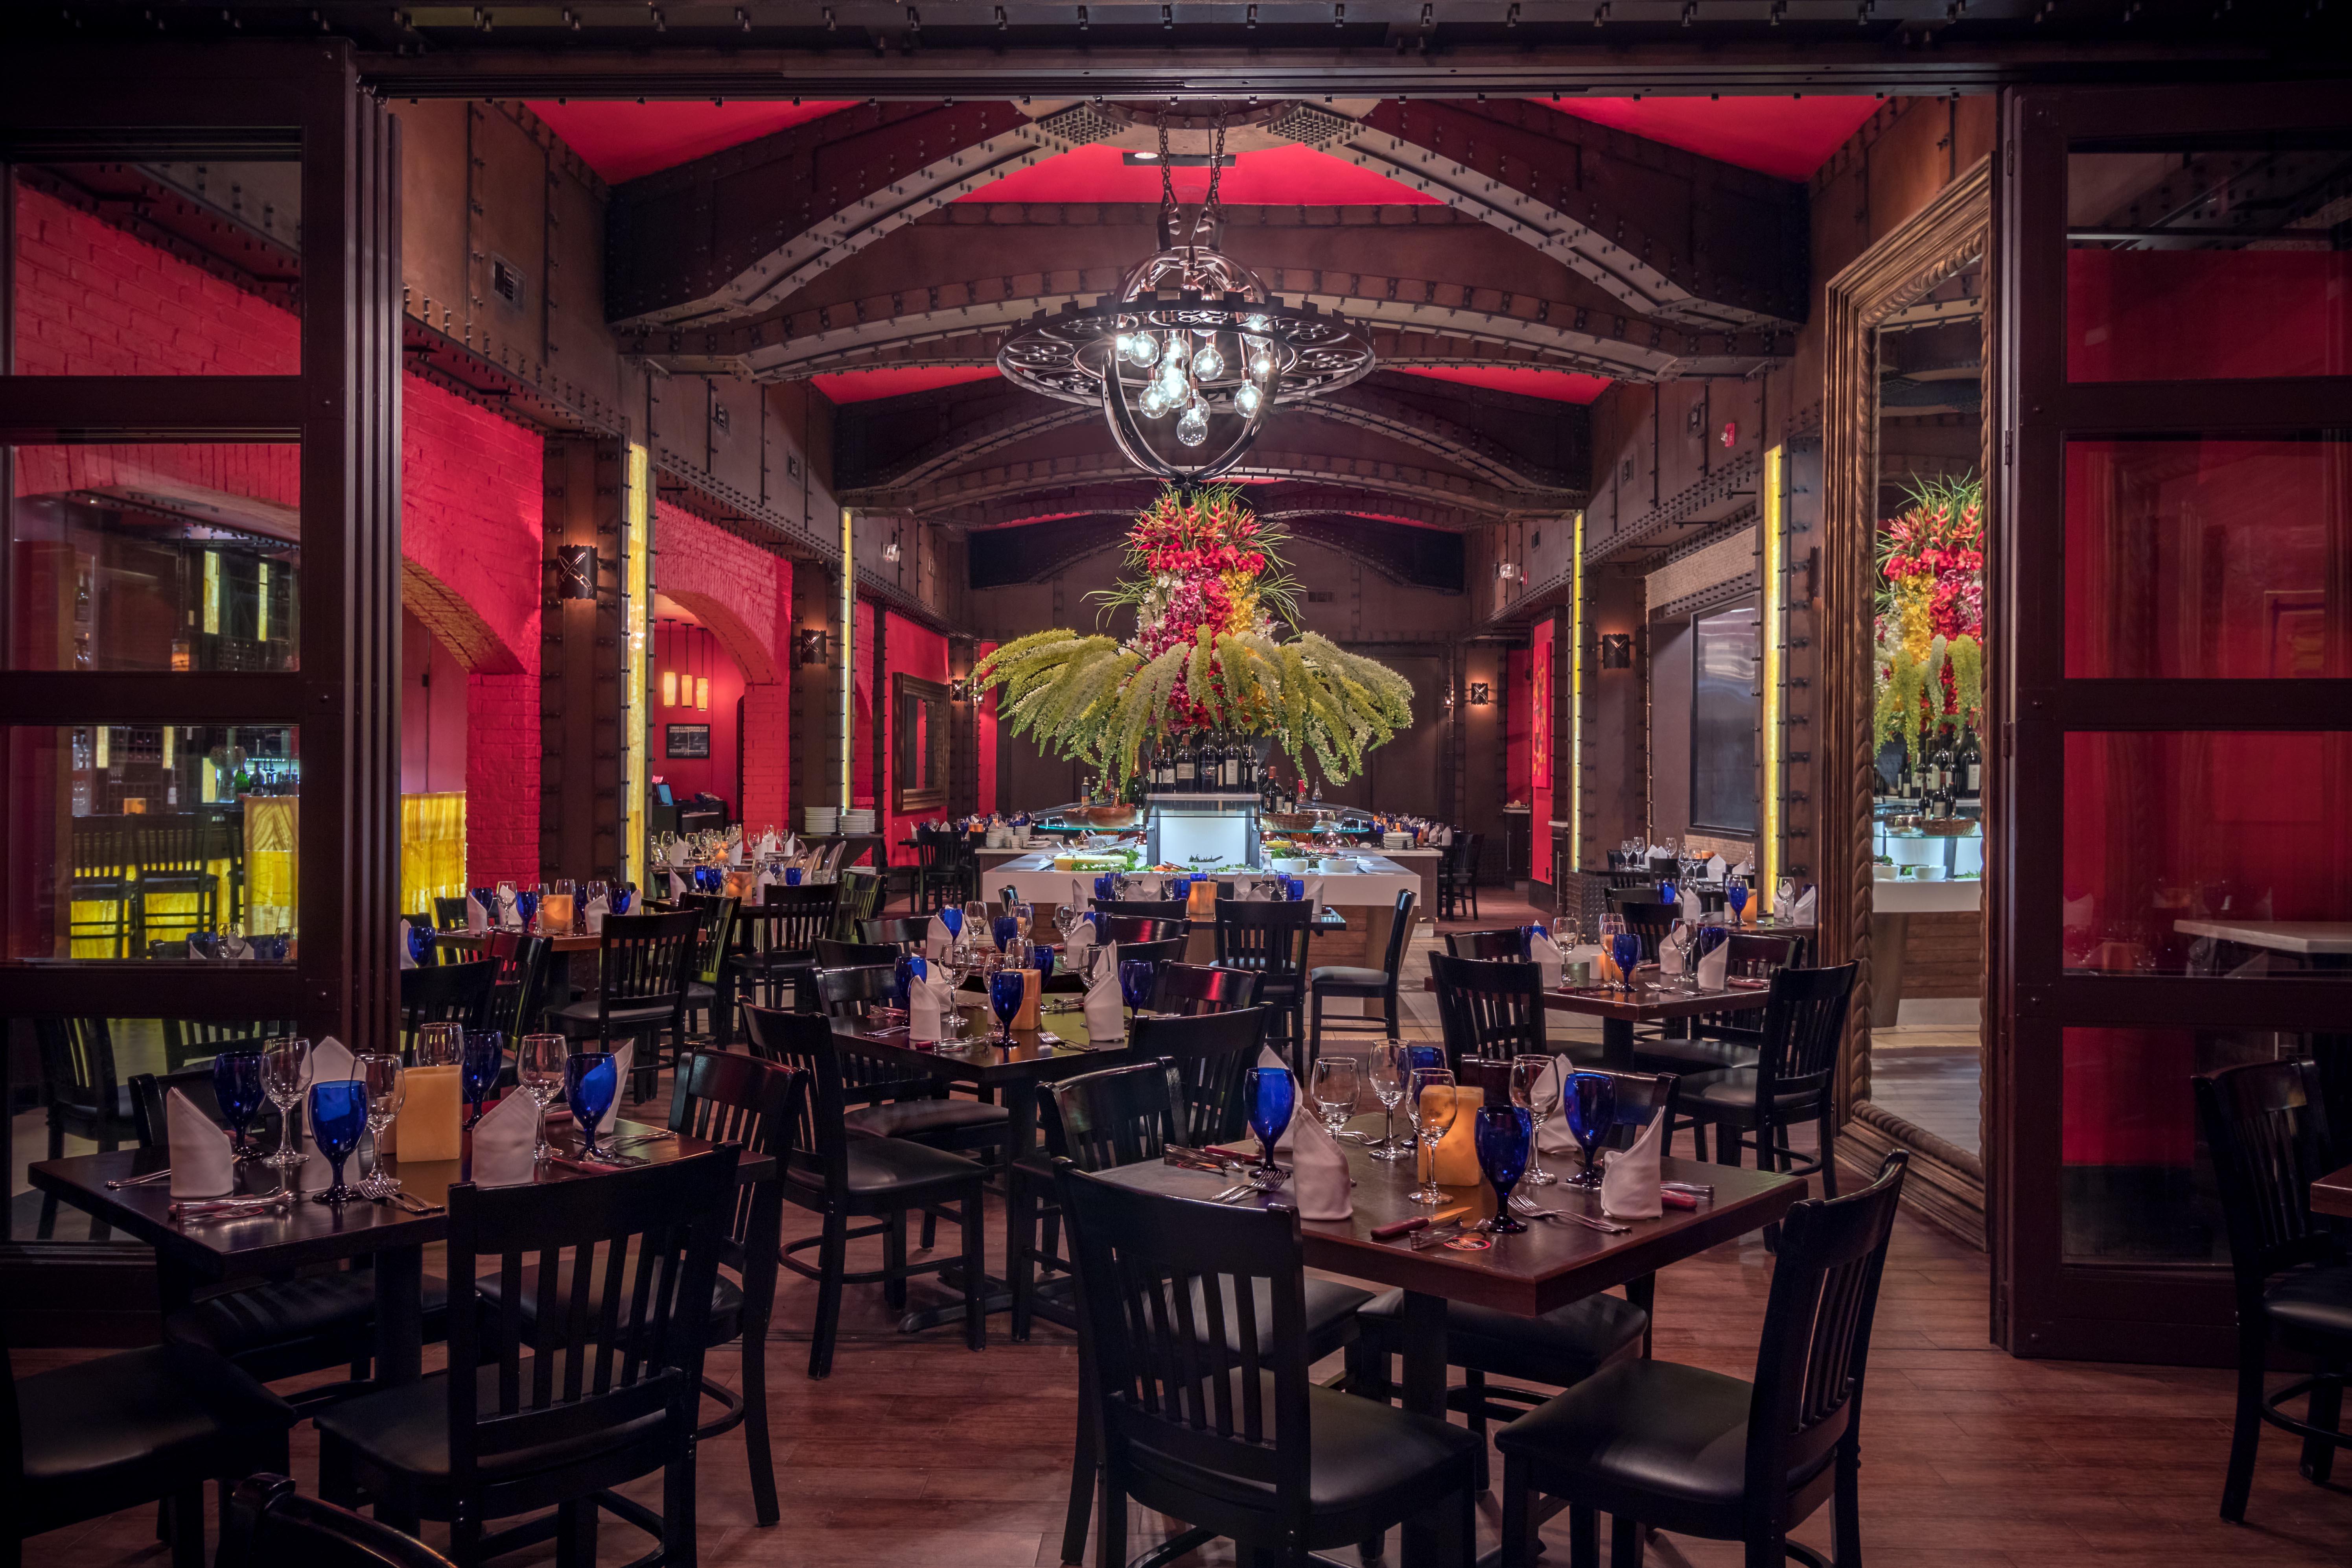 For a memorable gathering join us at Texas de Brazil, where the festivities – and your meal – never end.